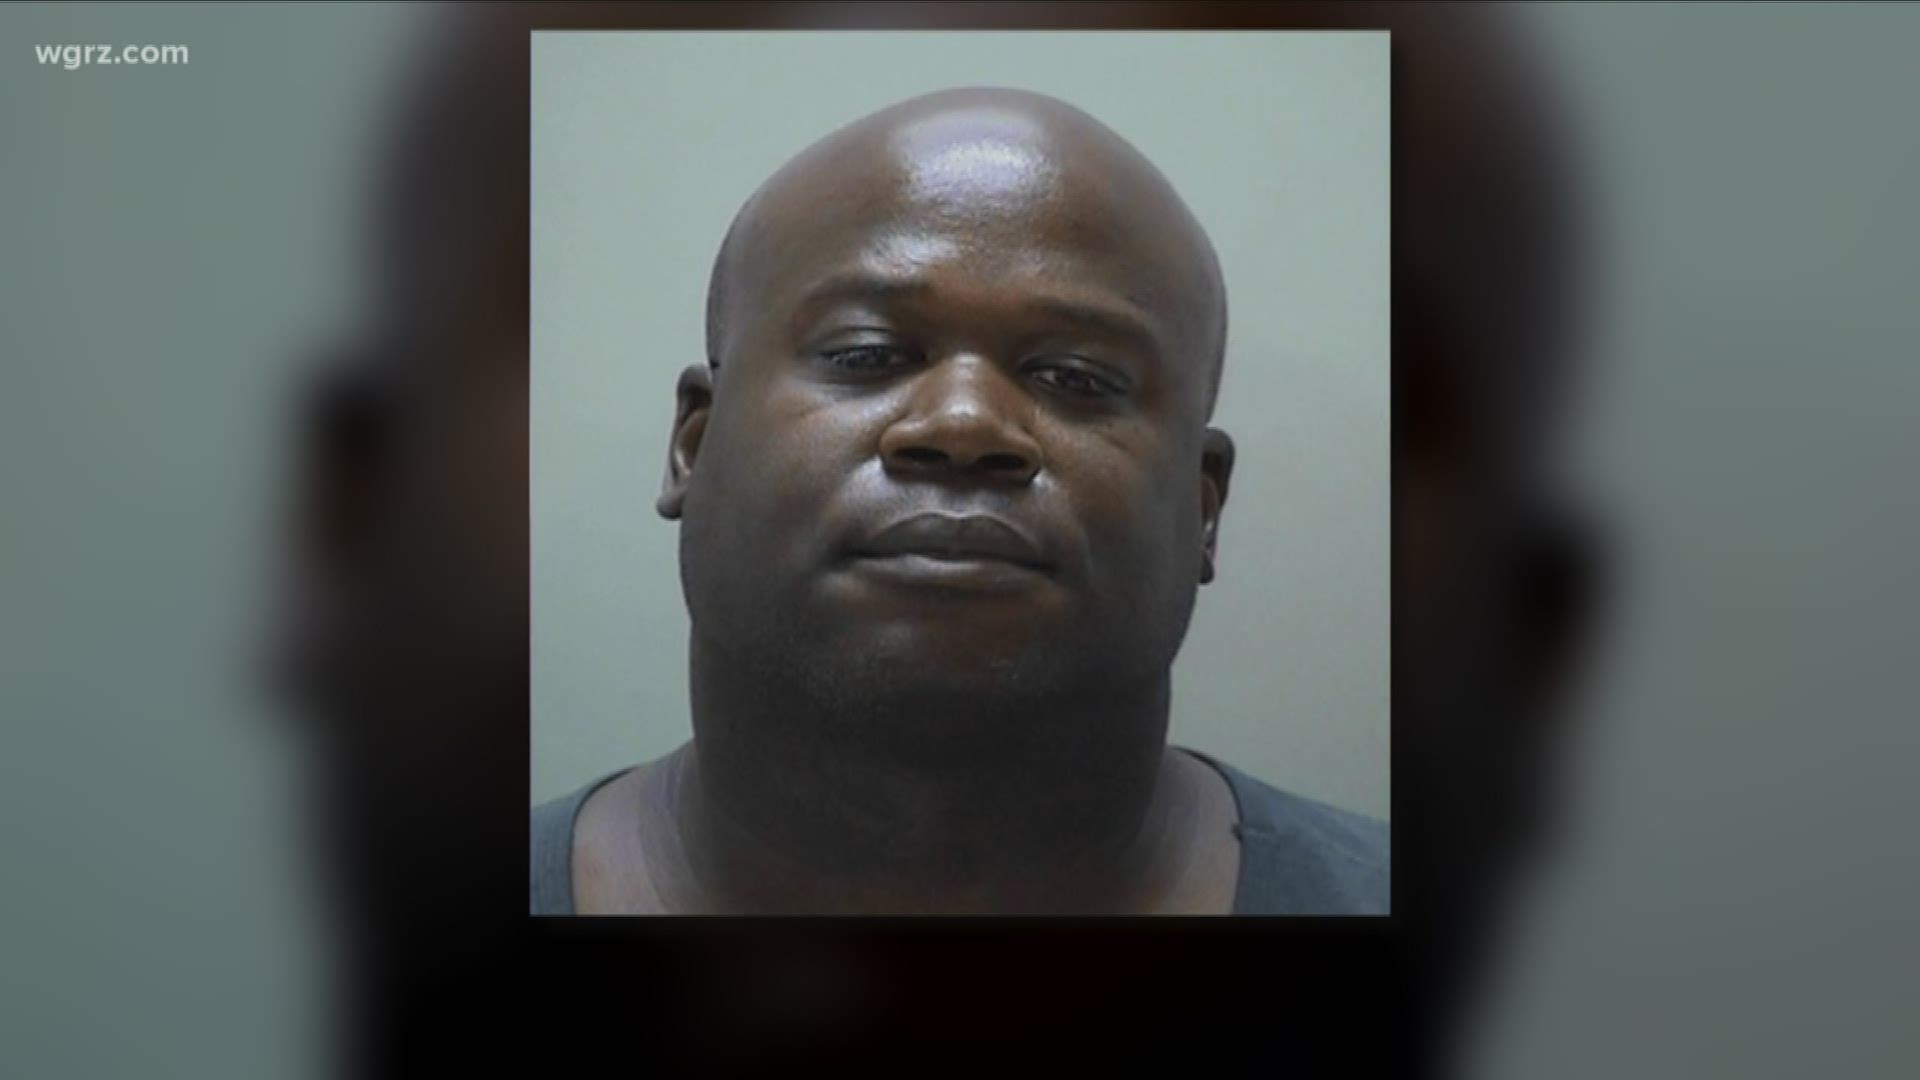 A man who was briefly with the Buffalo Bills almost two decades ago was arrested in Tennessee last week, accused of pulling a gun on some teenagers.